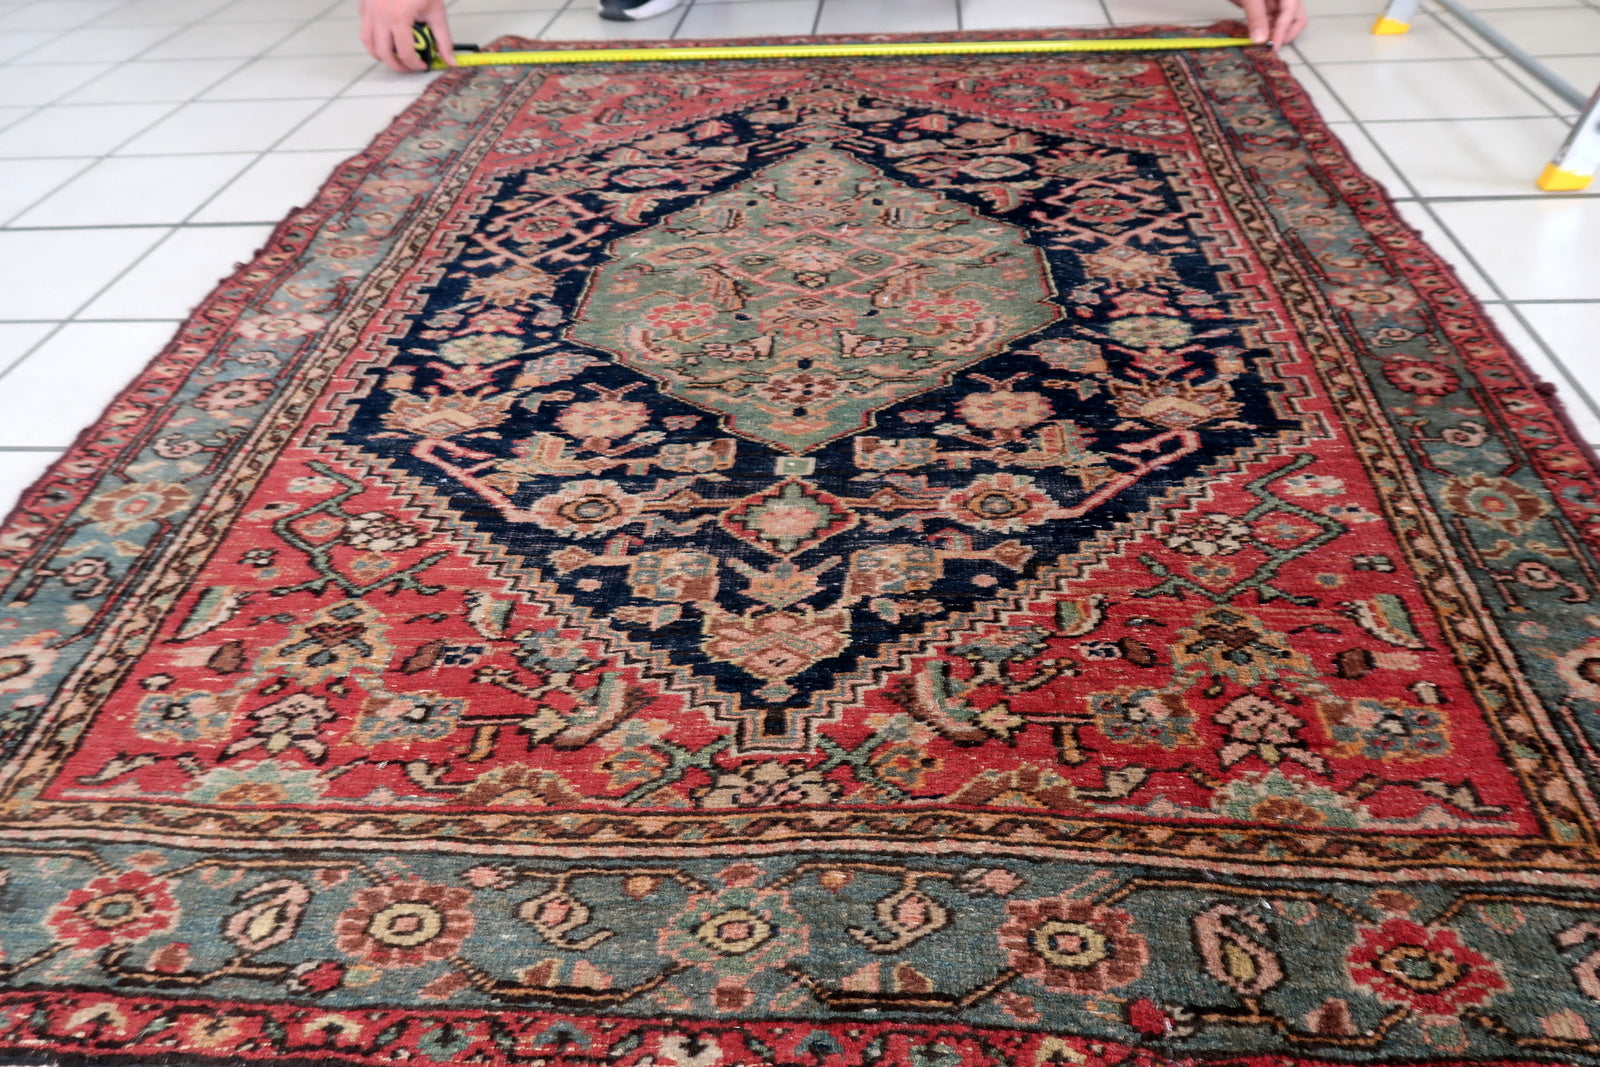 Vintage Farahan-Style Rug in Red and Turquoise